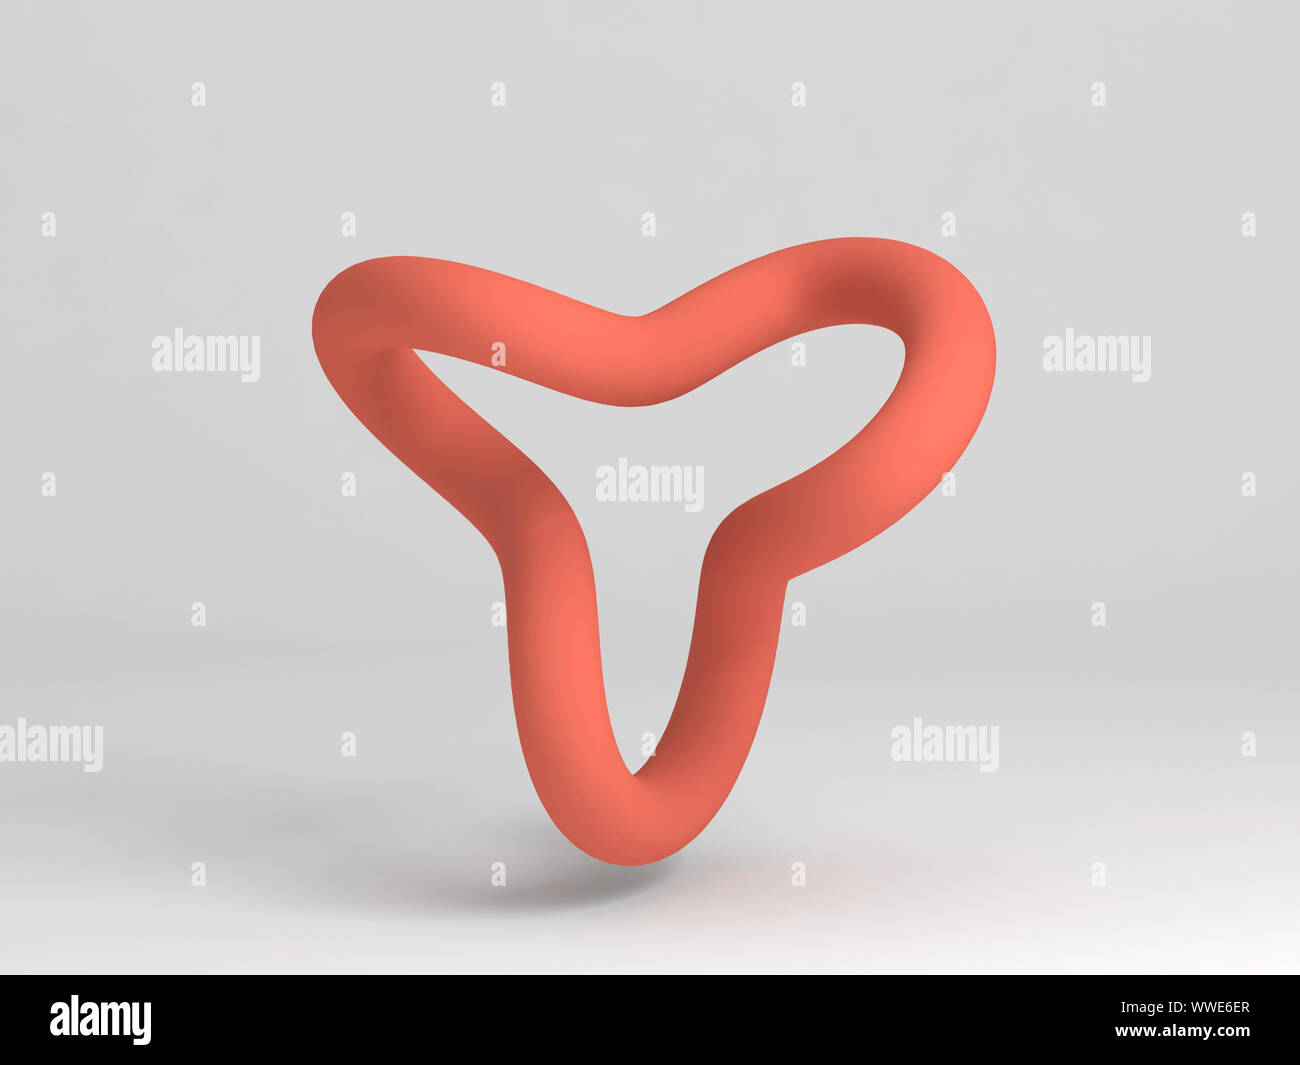 Abstract red round object. Torus knot over white background. 3d rendering illustration Stock Photo